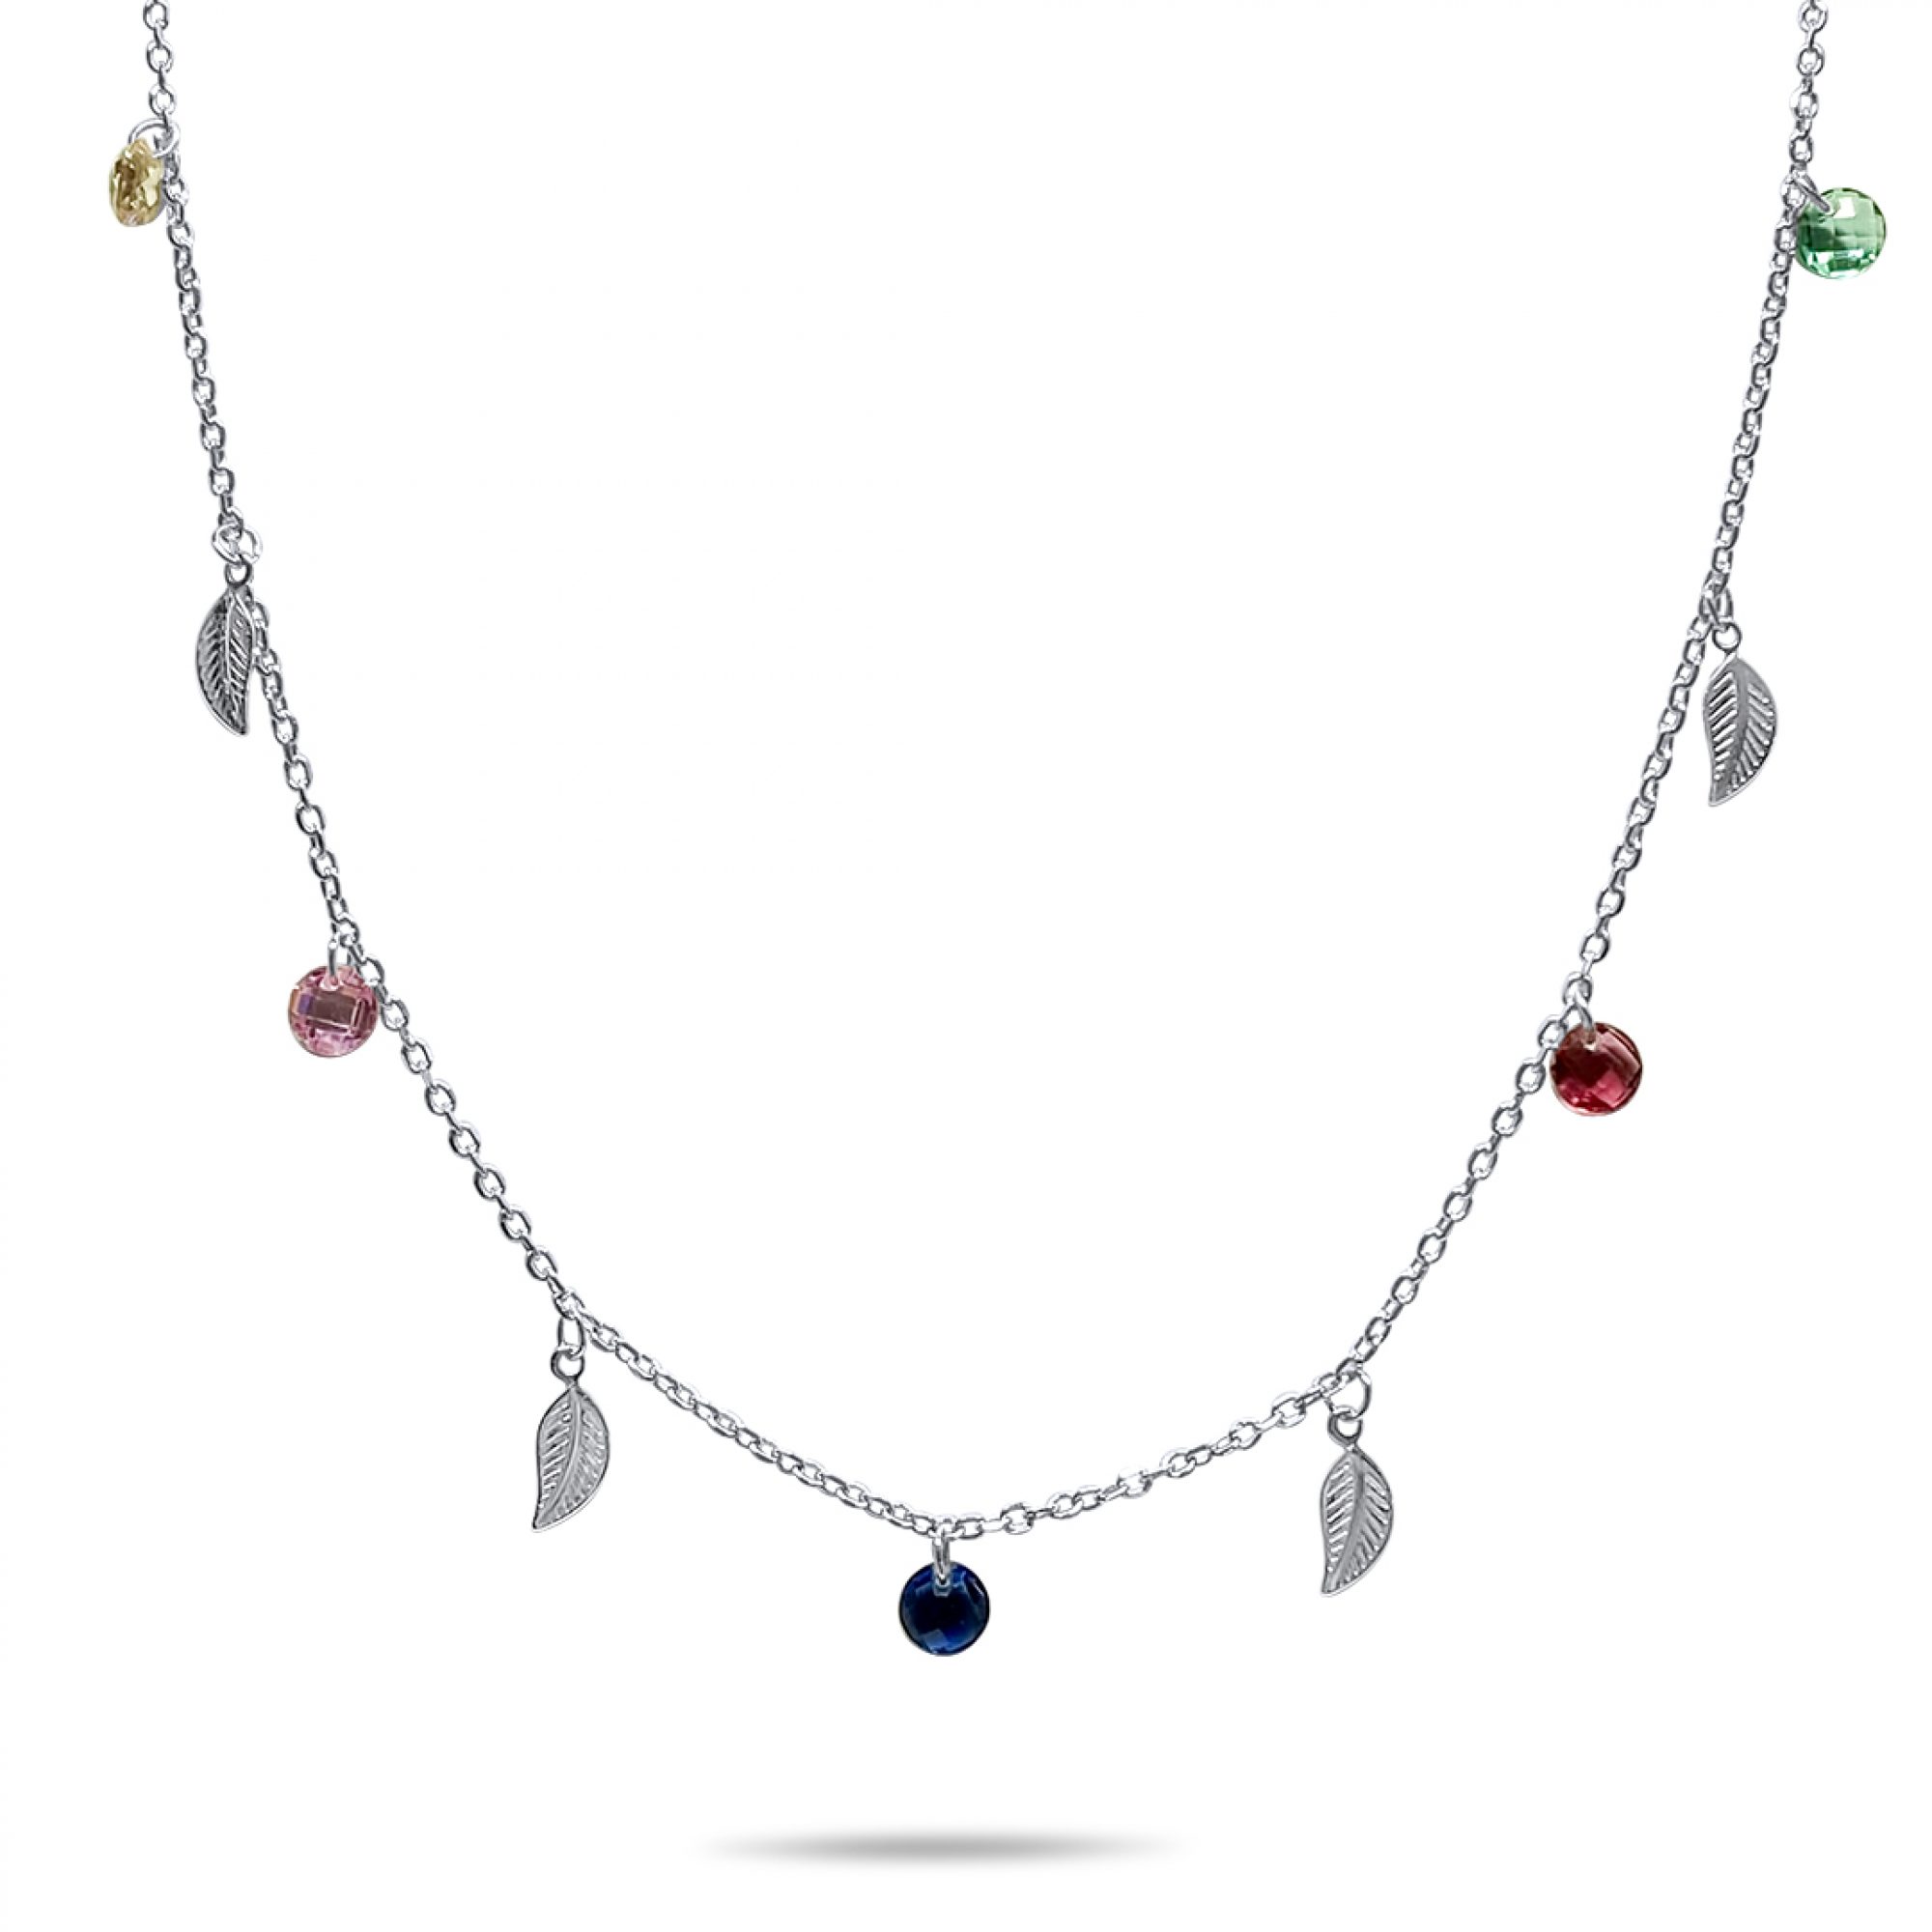 Dangle necklace with multicoloured stones